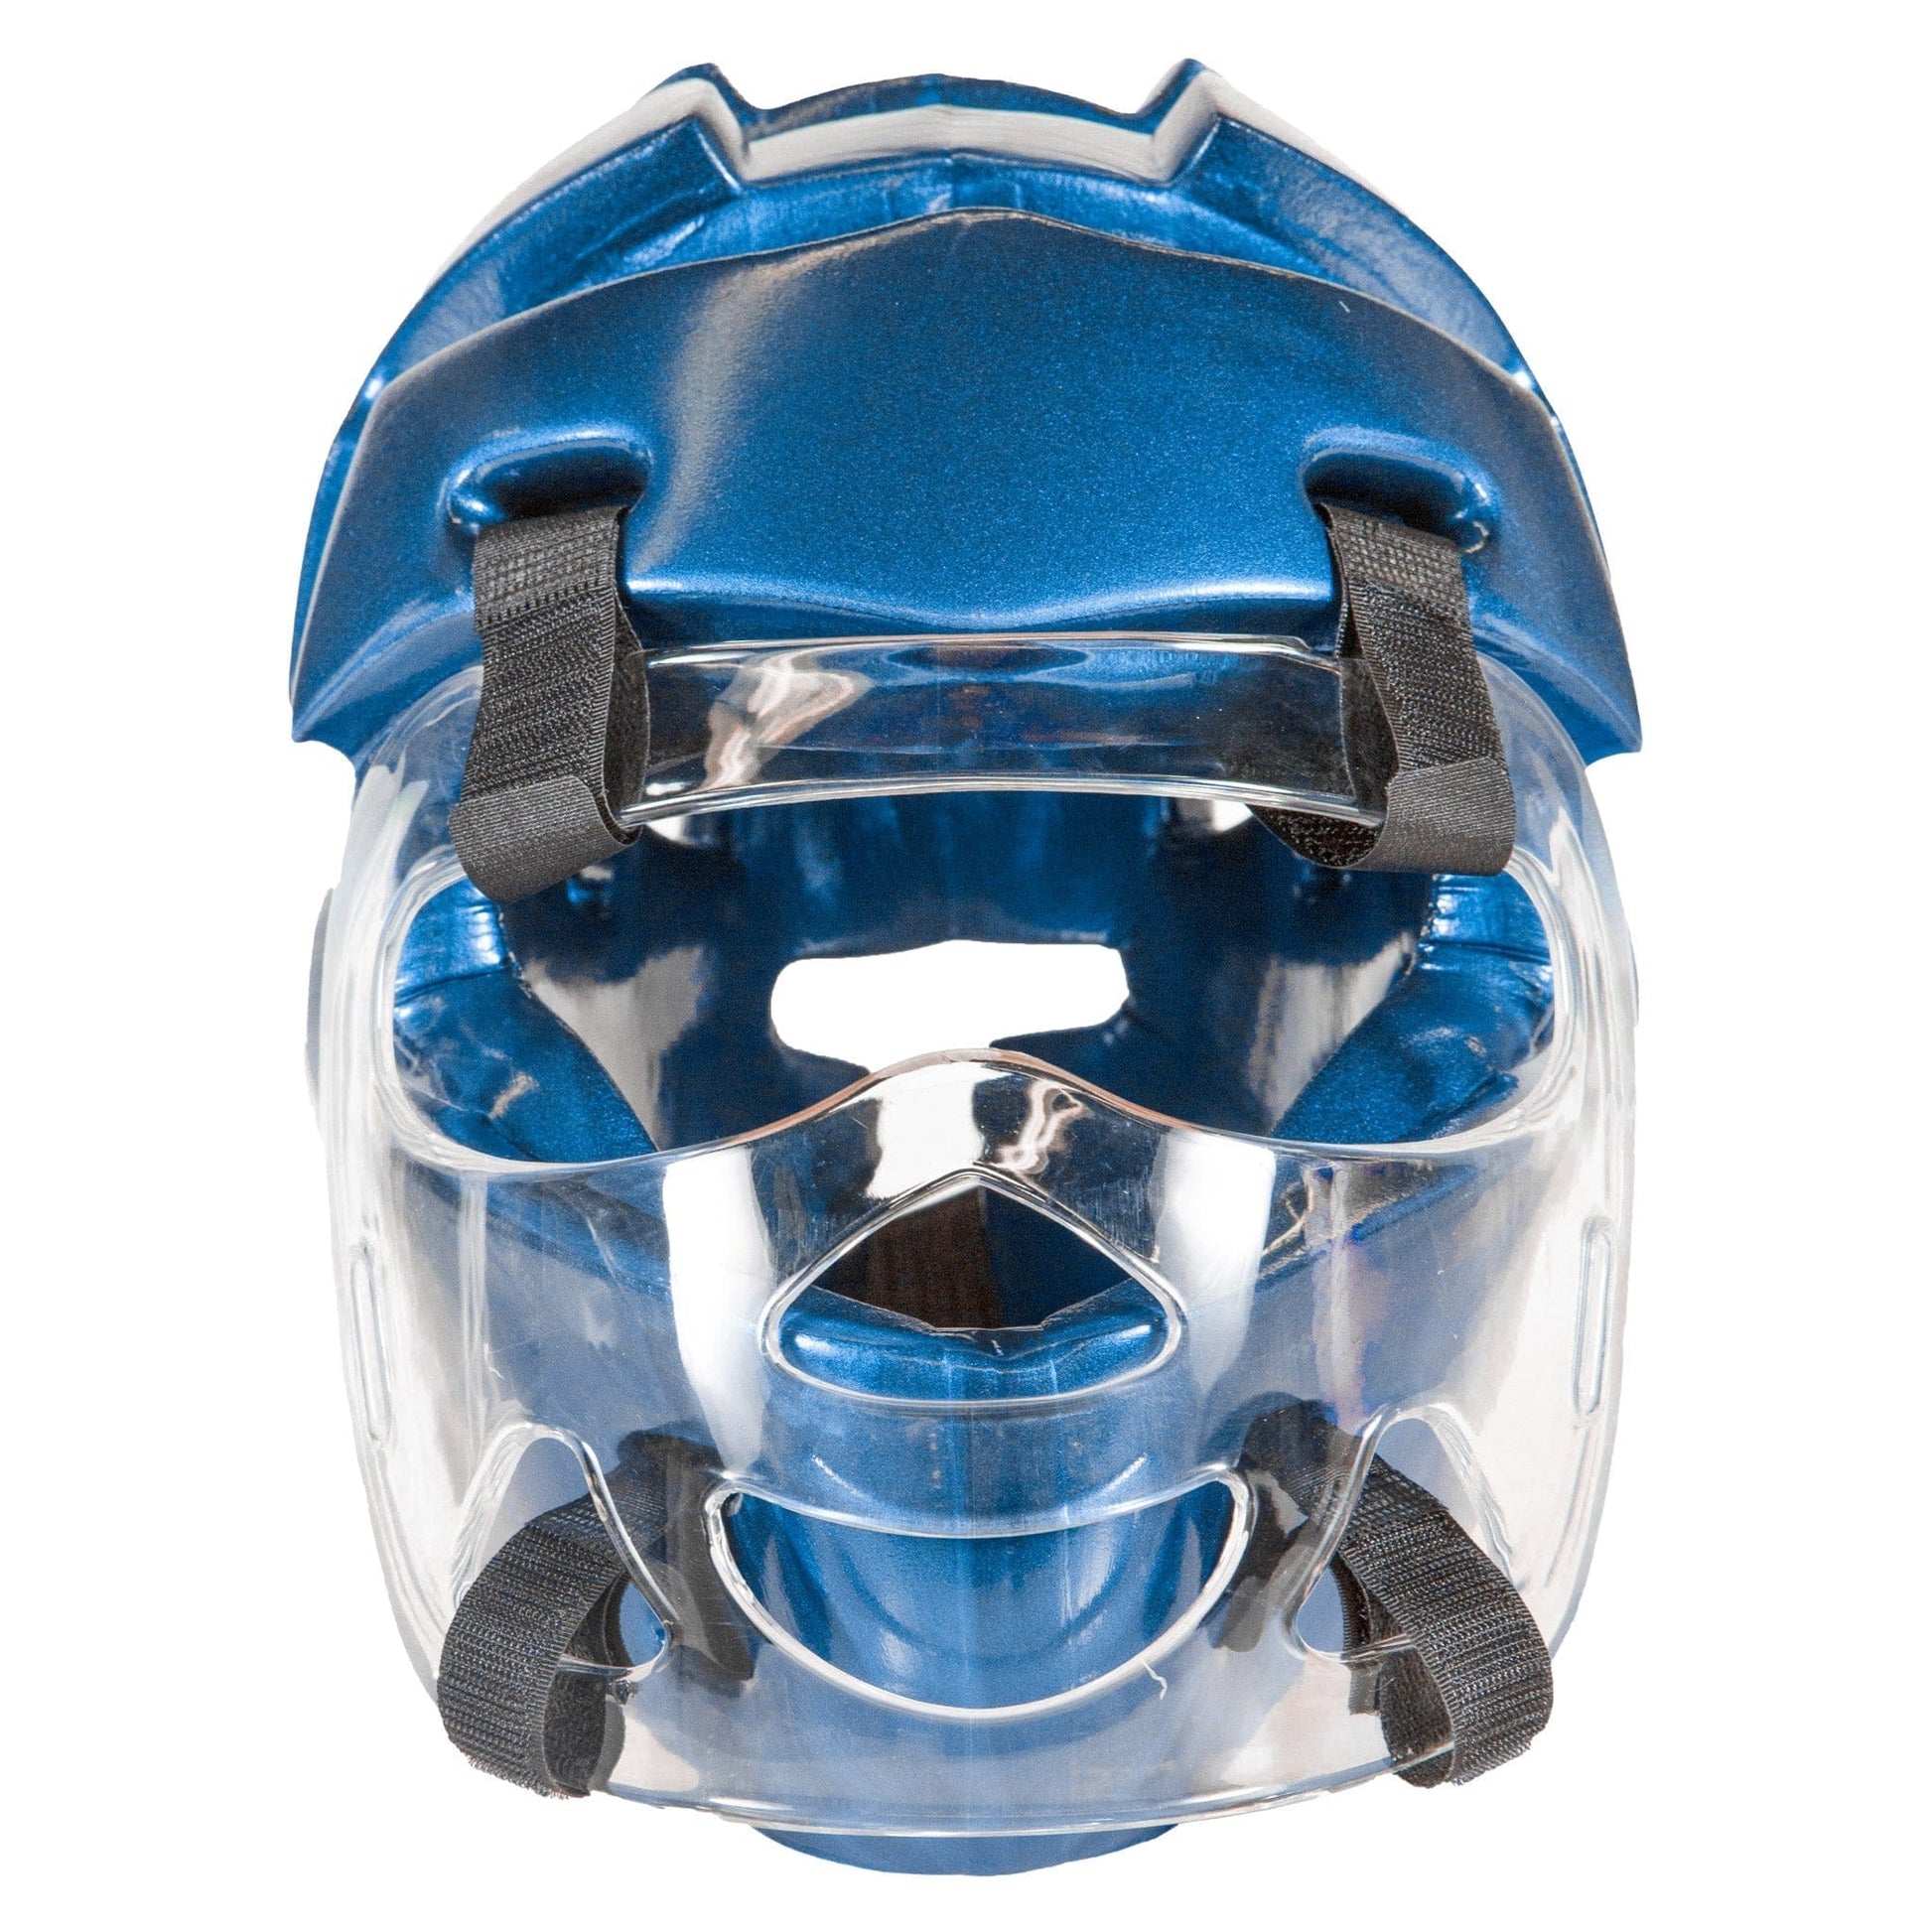 ProForce Sparring Gear ProForce Lighting 5 Piece Sparring Gear Combo Set BLUE with Full head and face mask